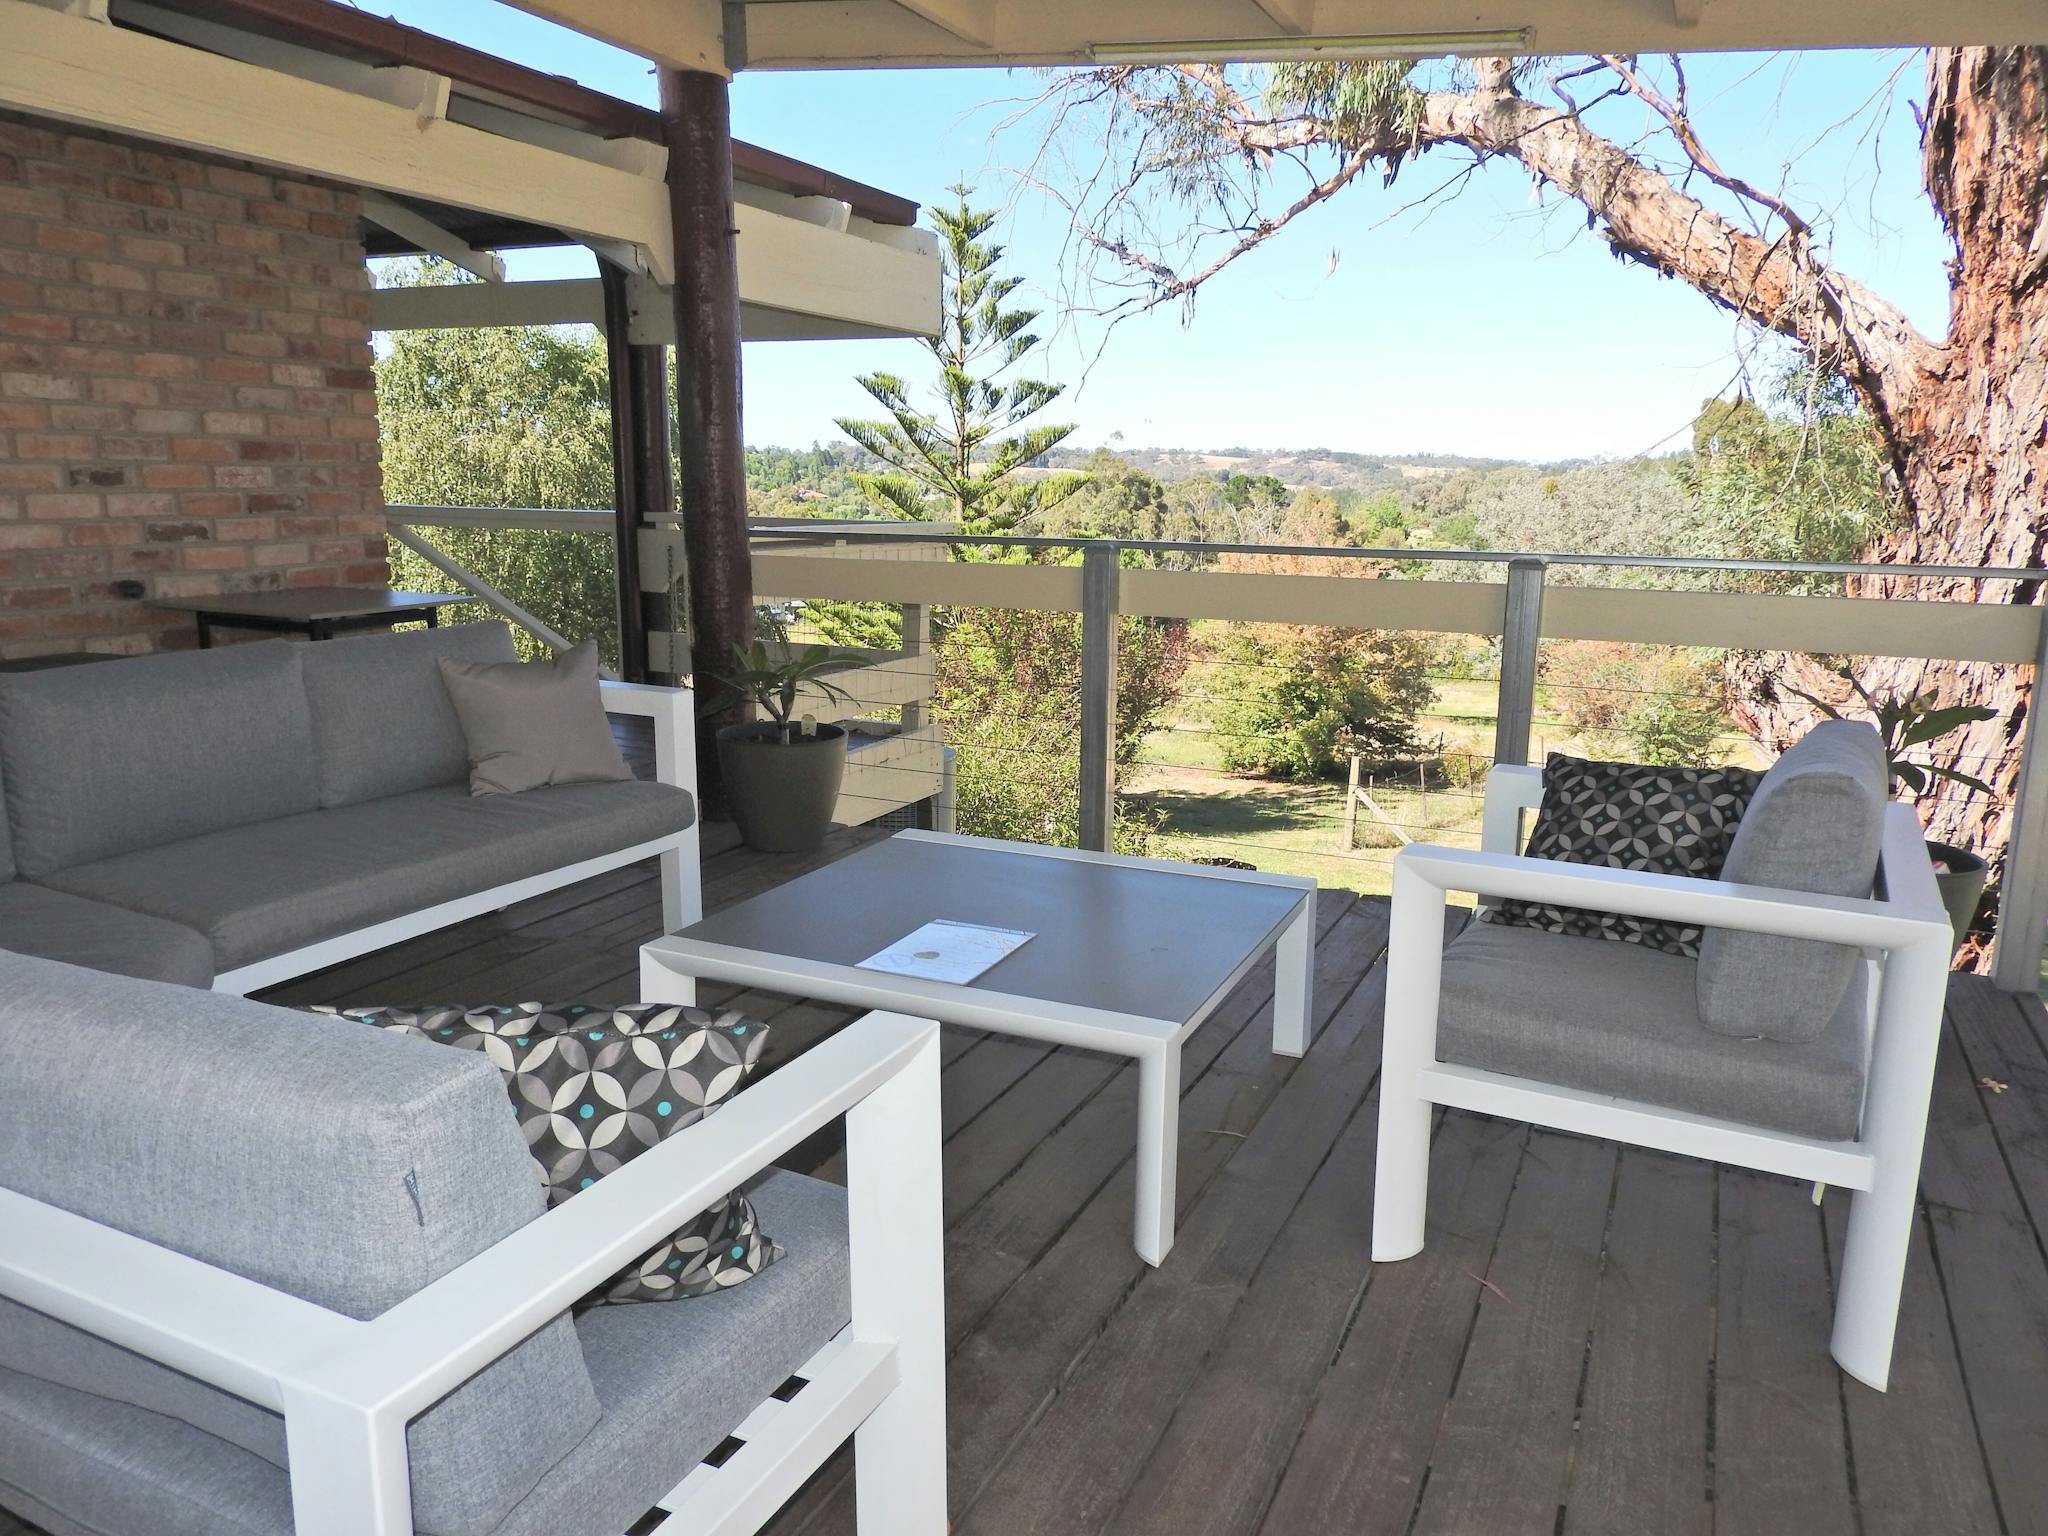 Deck overlooking towards gorge and township